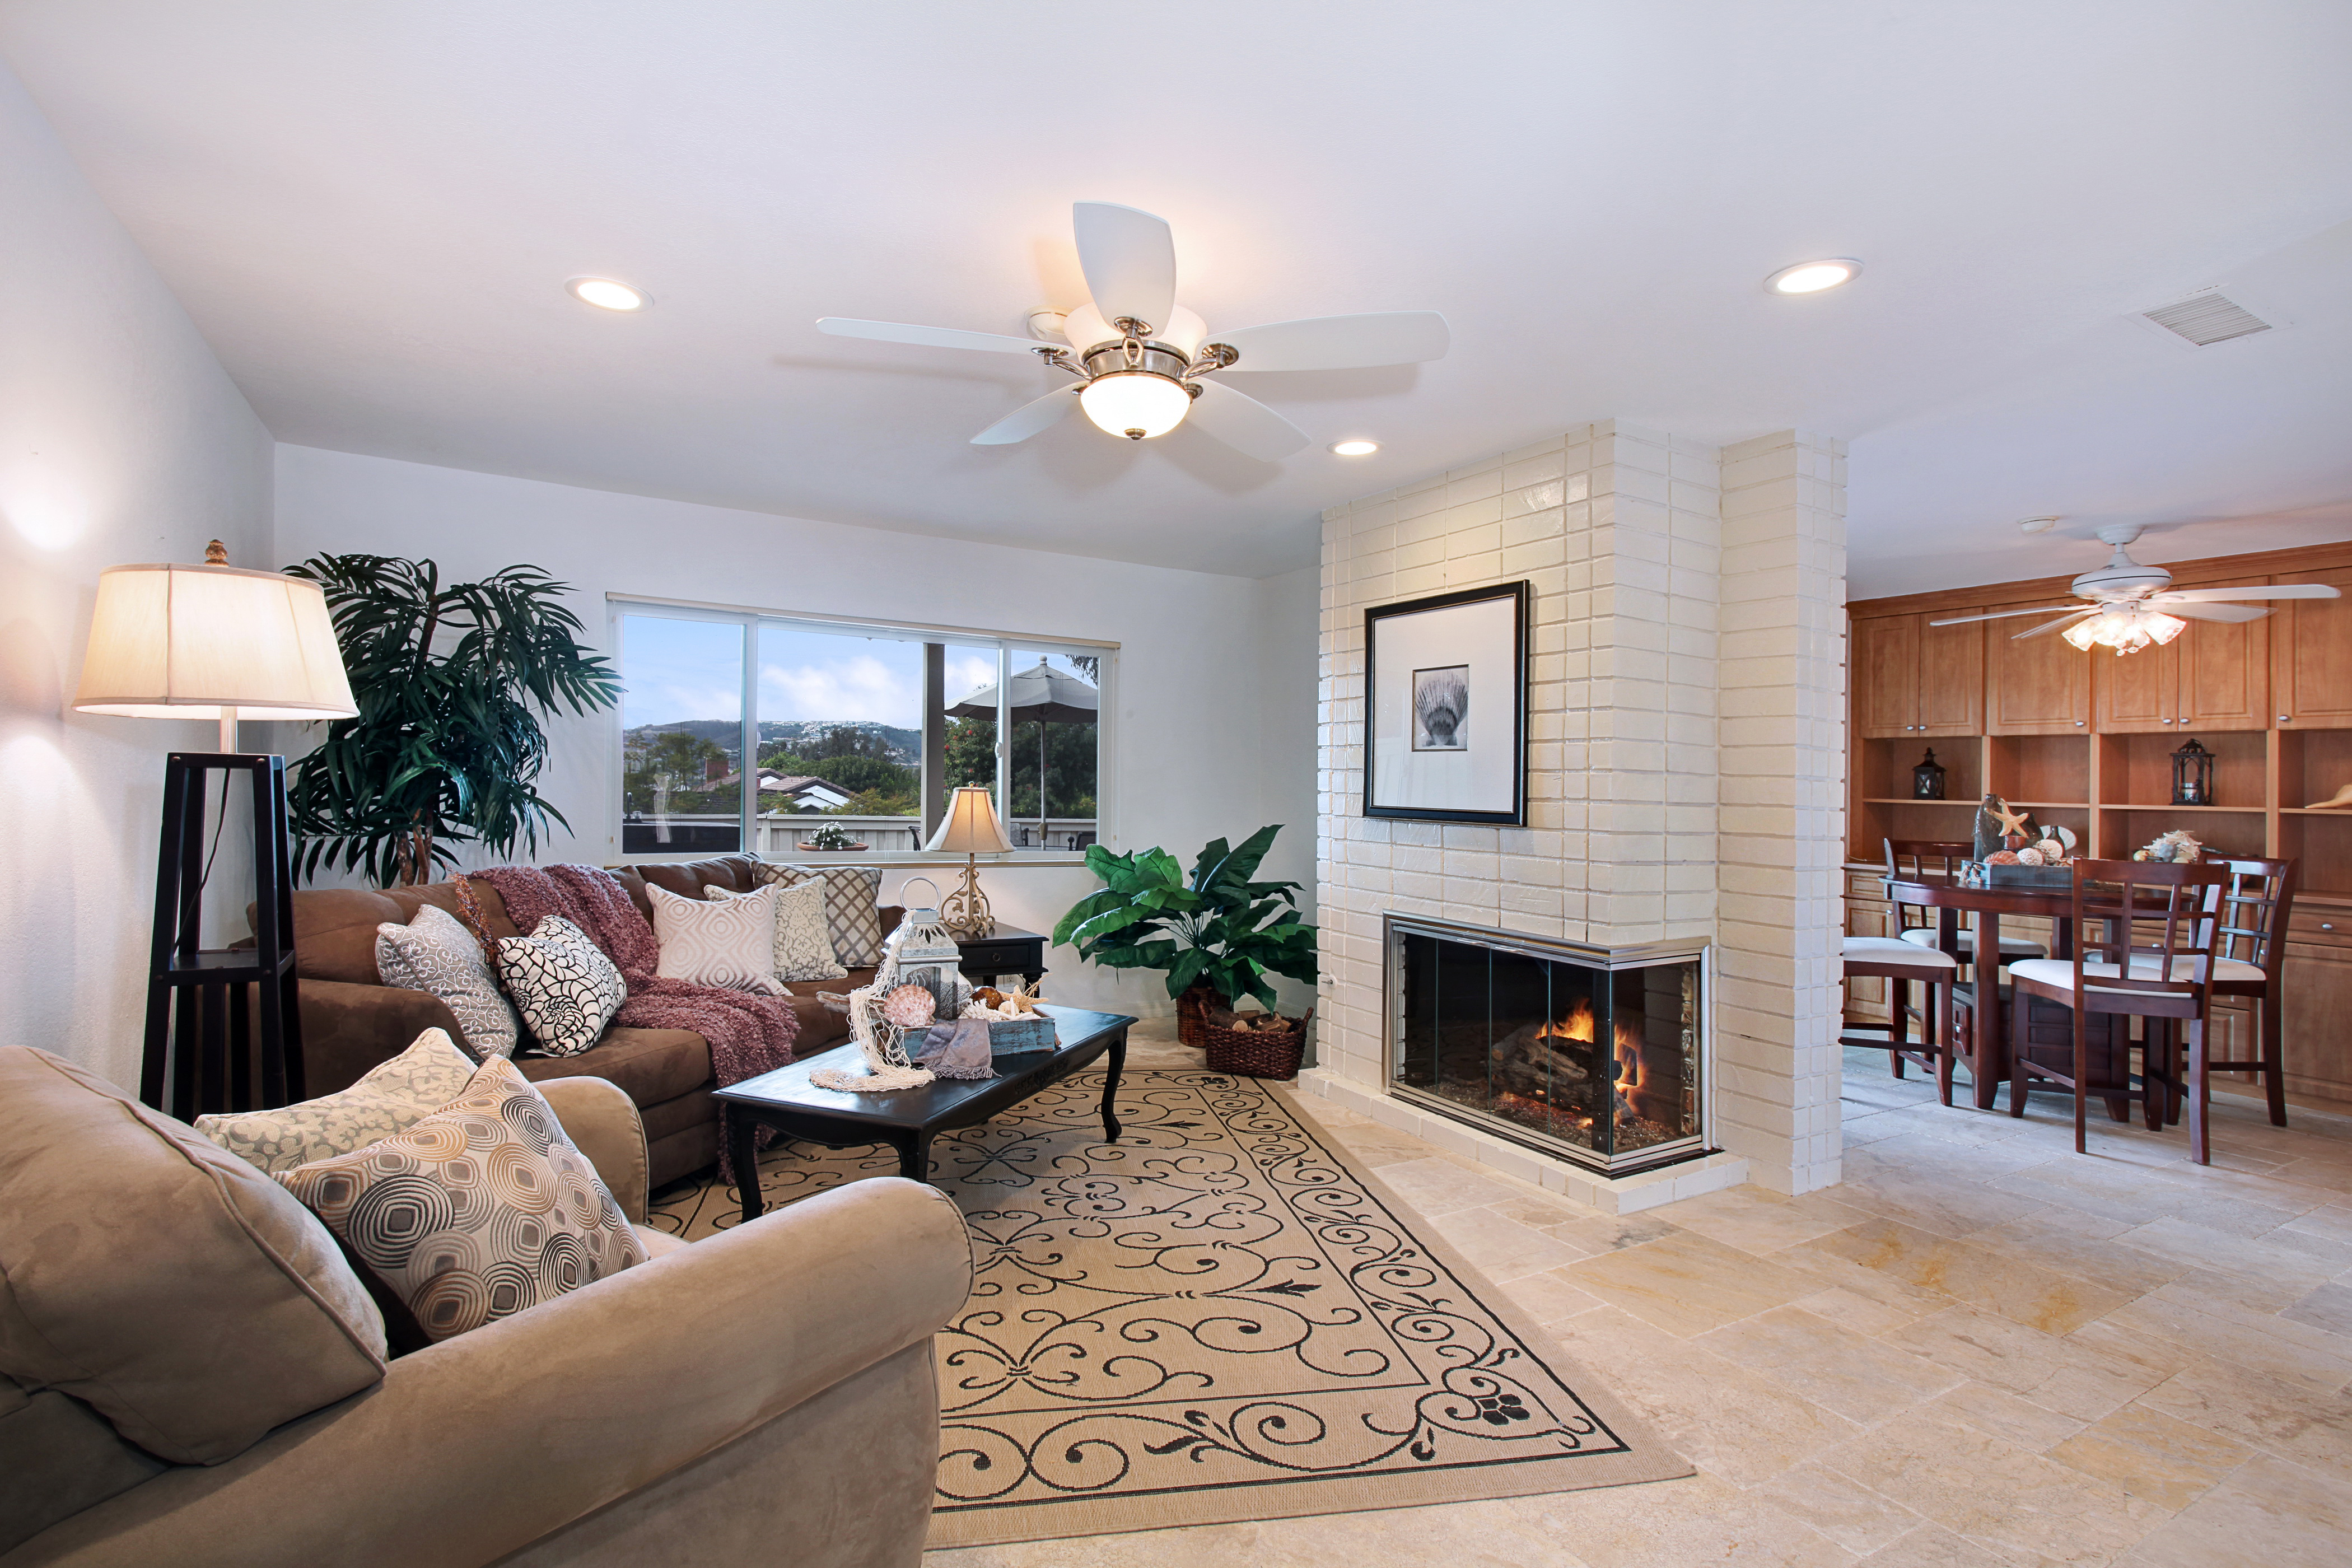 Choosing a fireplace design for a large and bright living room